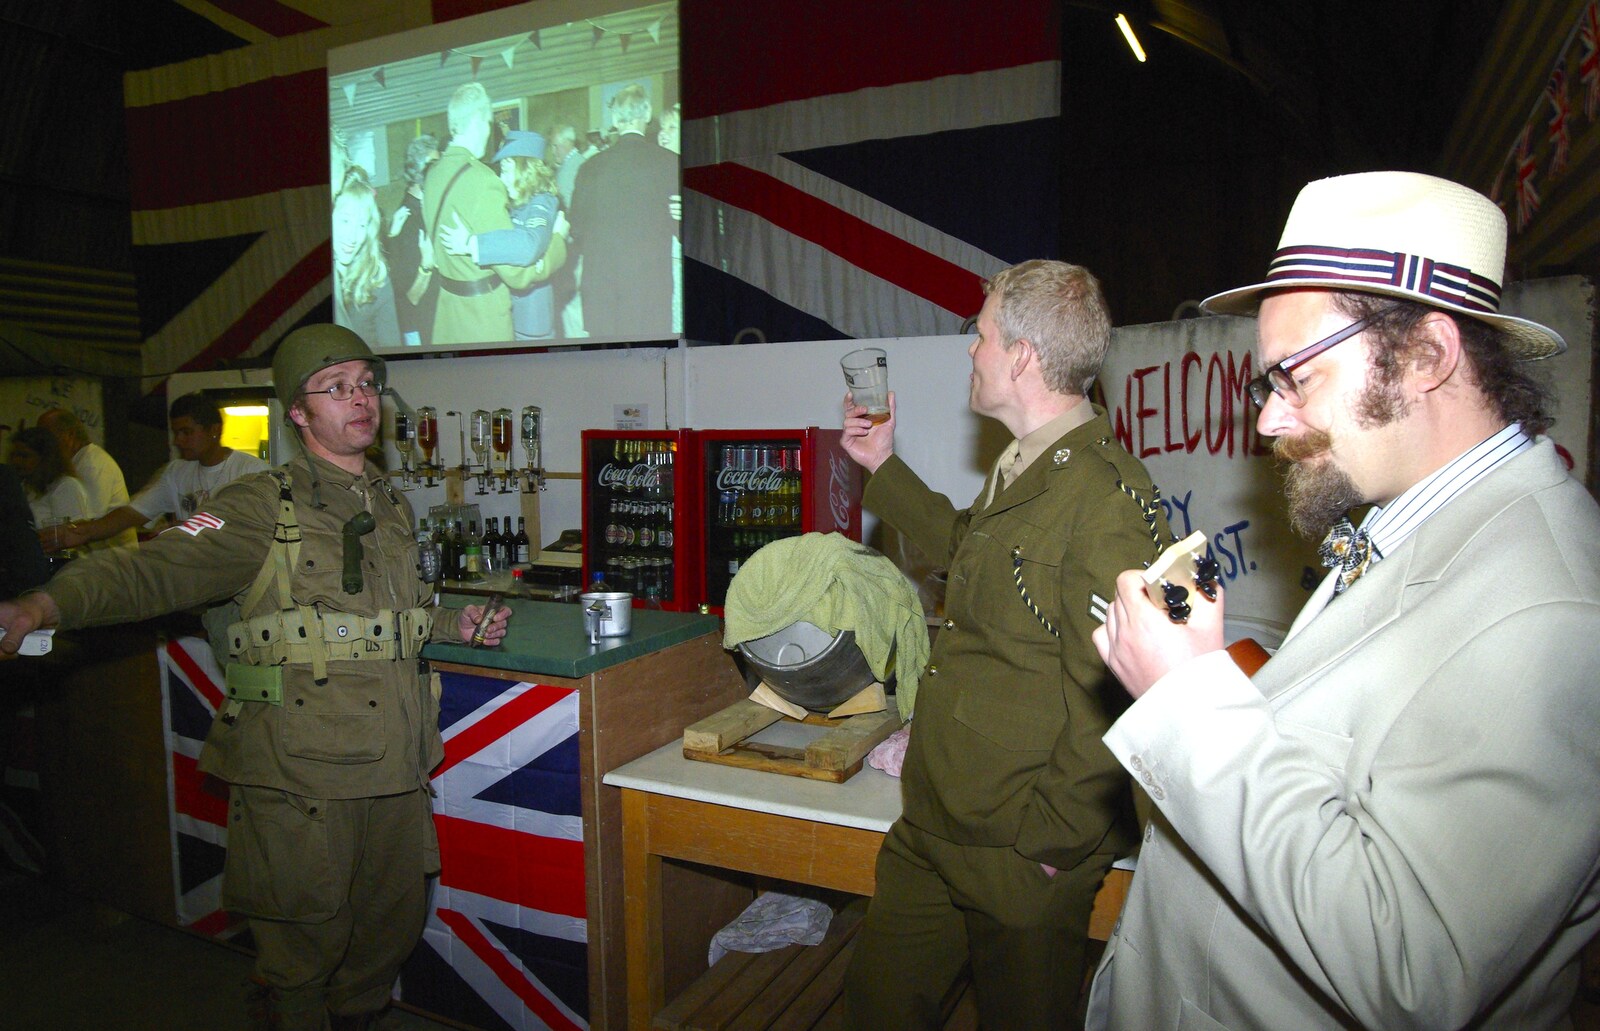 Bill looks at one of Nosher's photos on screen from The Debach Airfield 1940s Dance, Debach, Suffolk - 6th June 2009